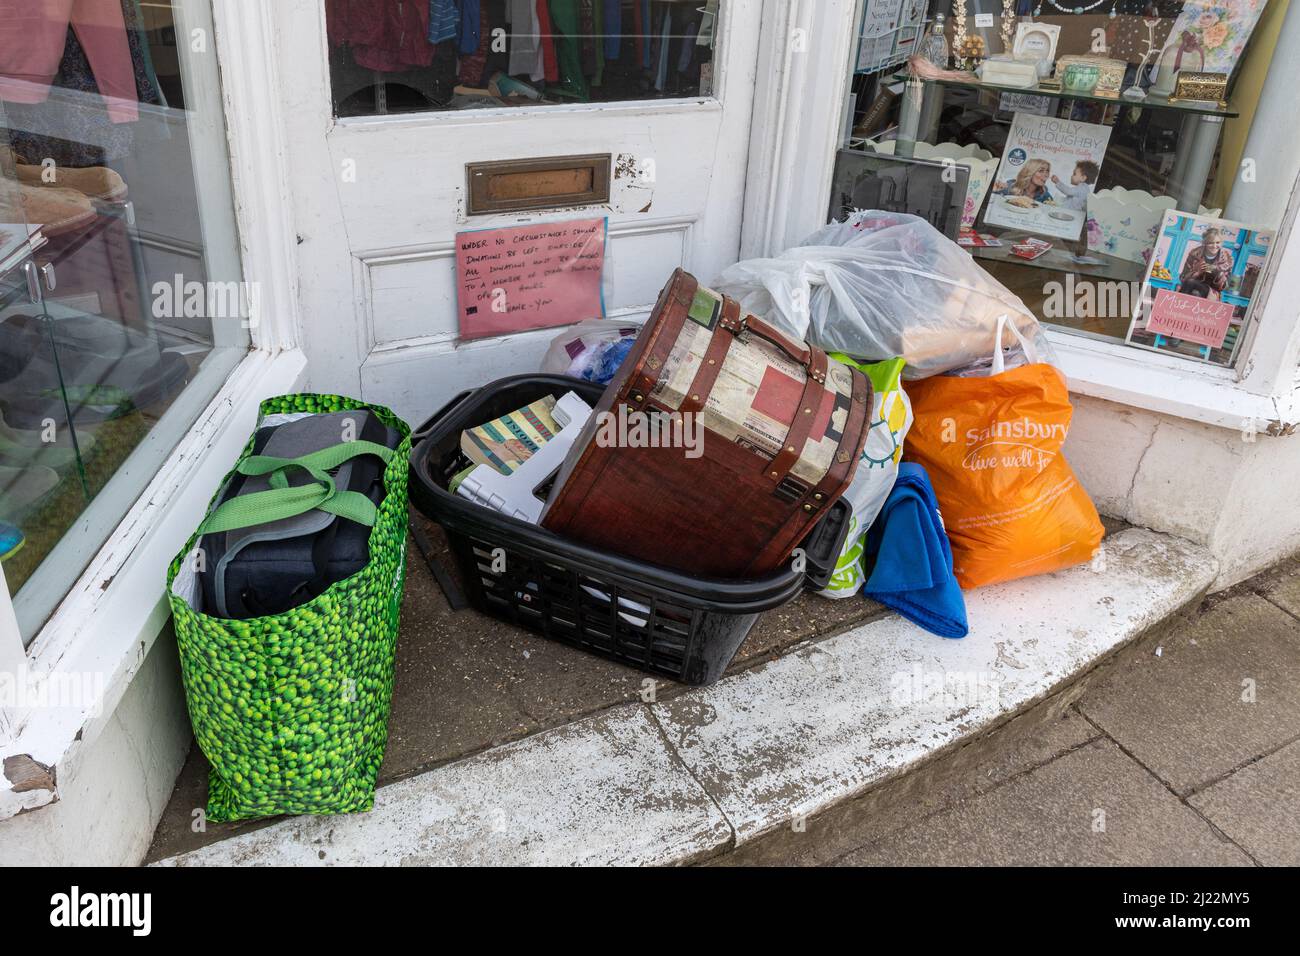 Bags of donated second hand goods left in the entrance to a charity shop despite a notice asking people not to do this, UK Stock Photo